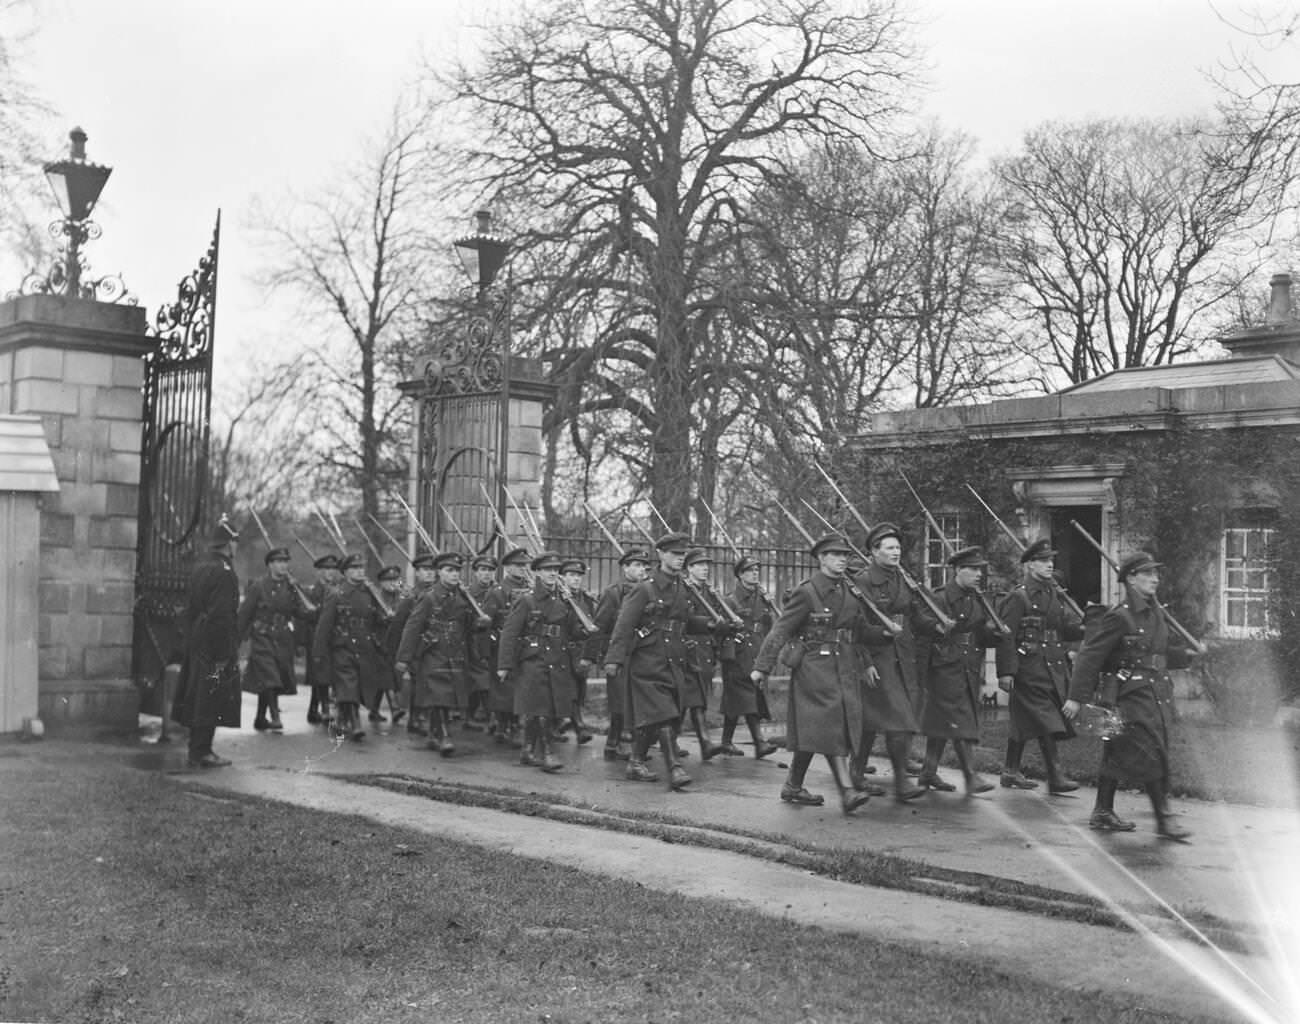 Dublin's farewell to British troops with Free State troops entering the gates of the Vice Regal Lodge, 1922.